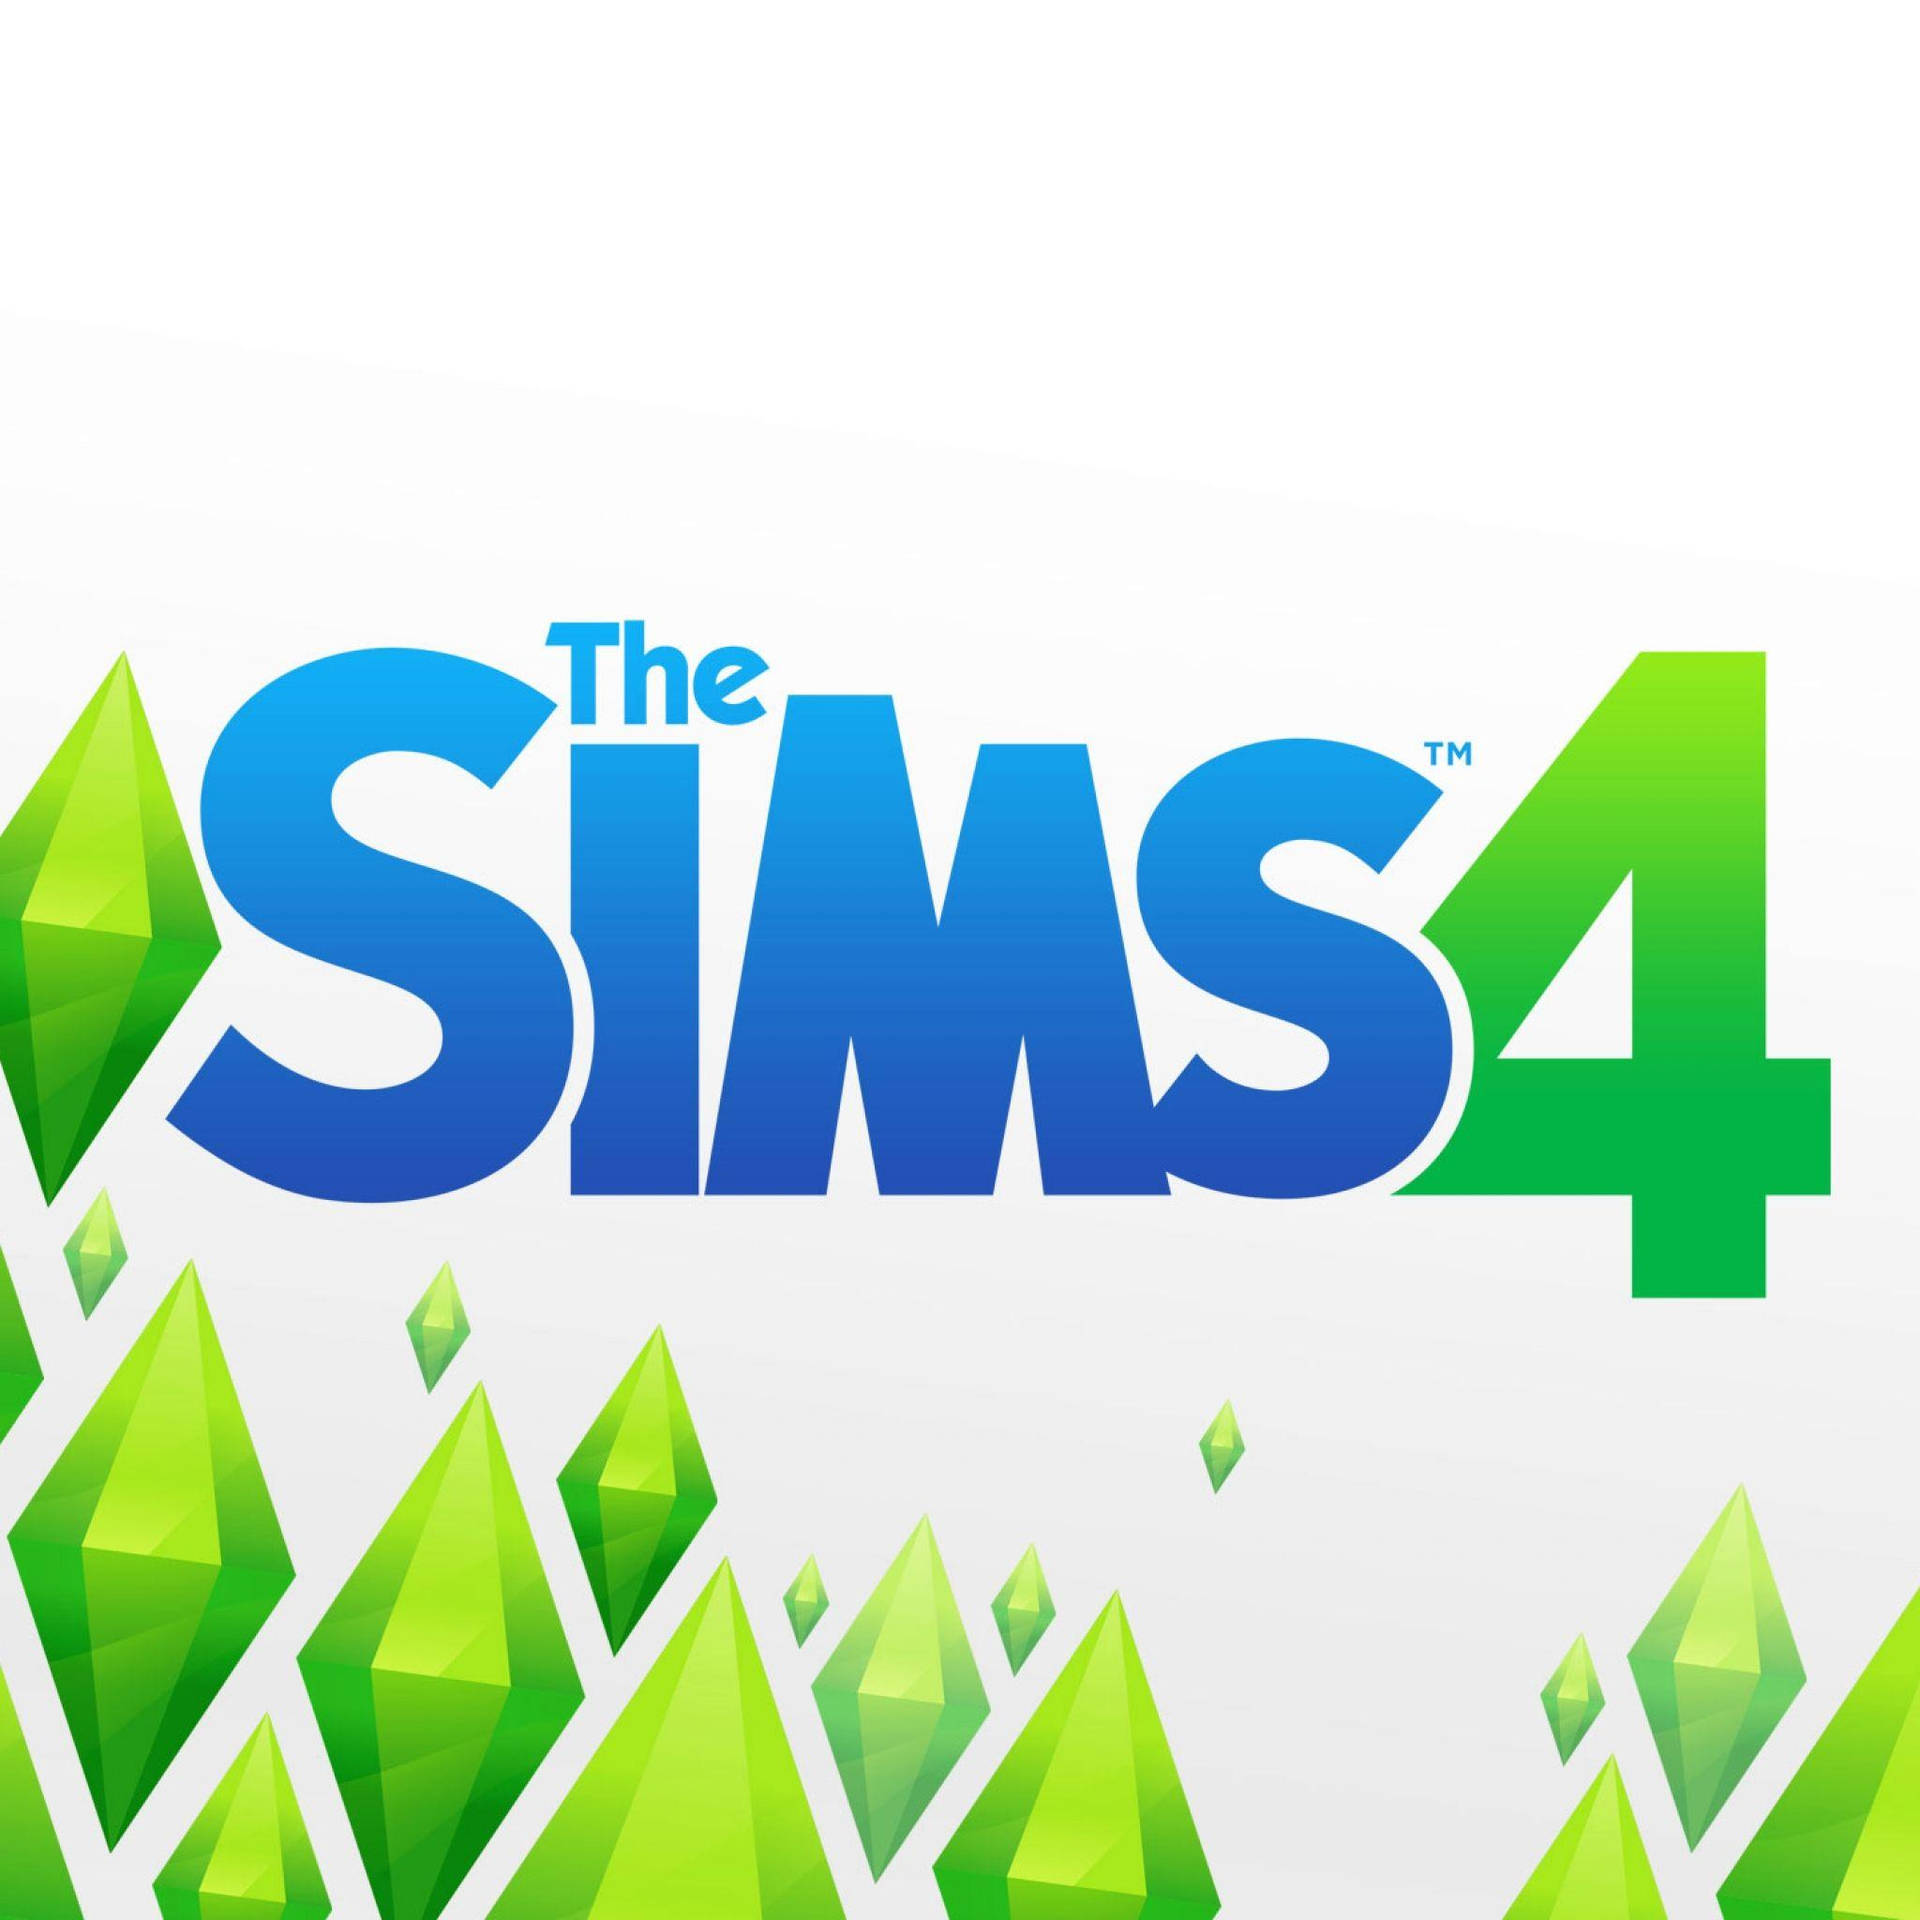 The Sims 4 Logo Background